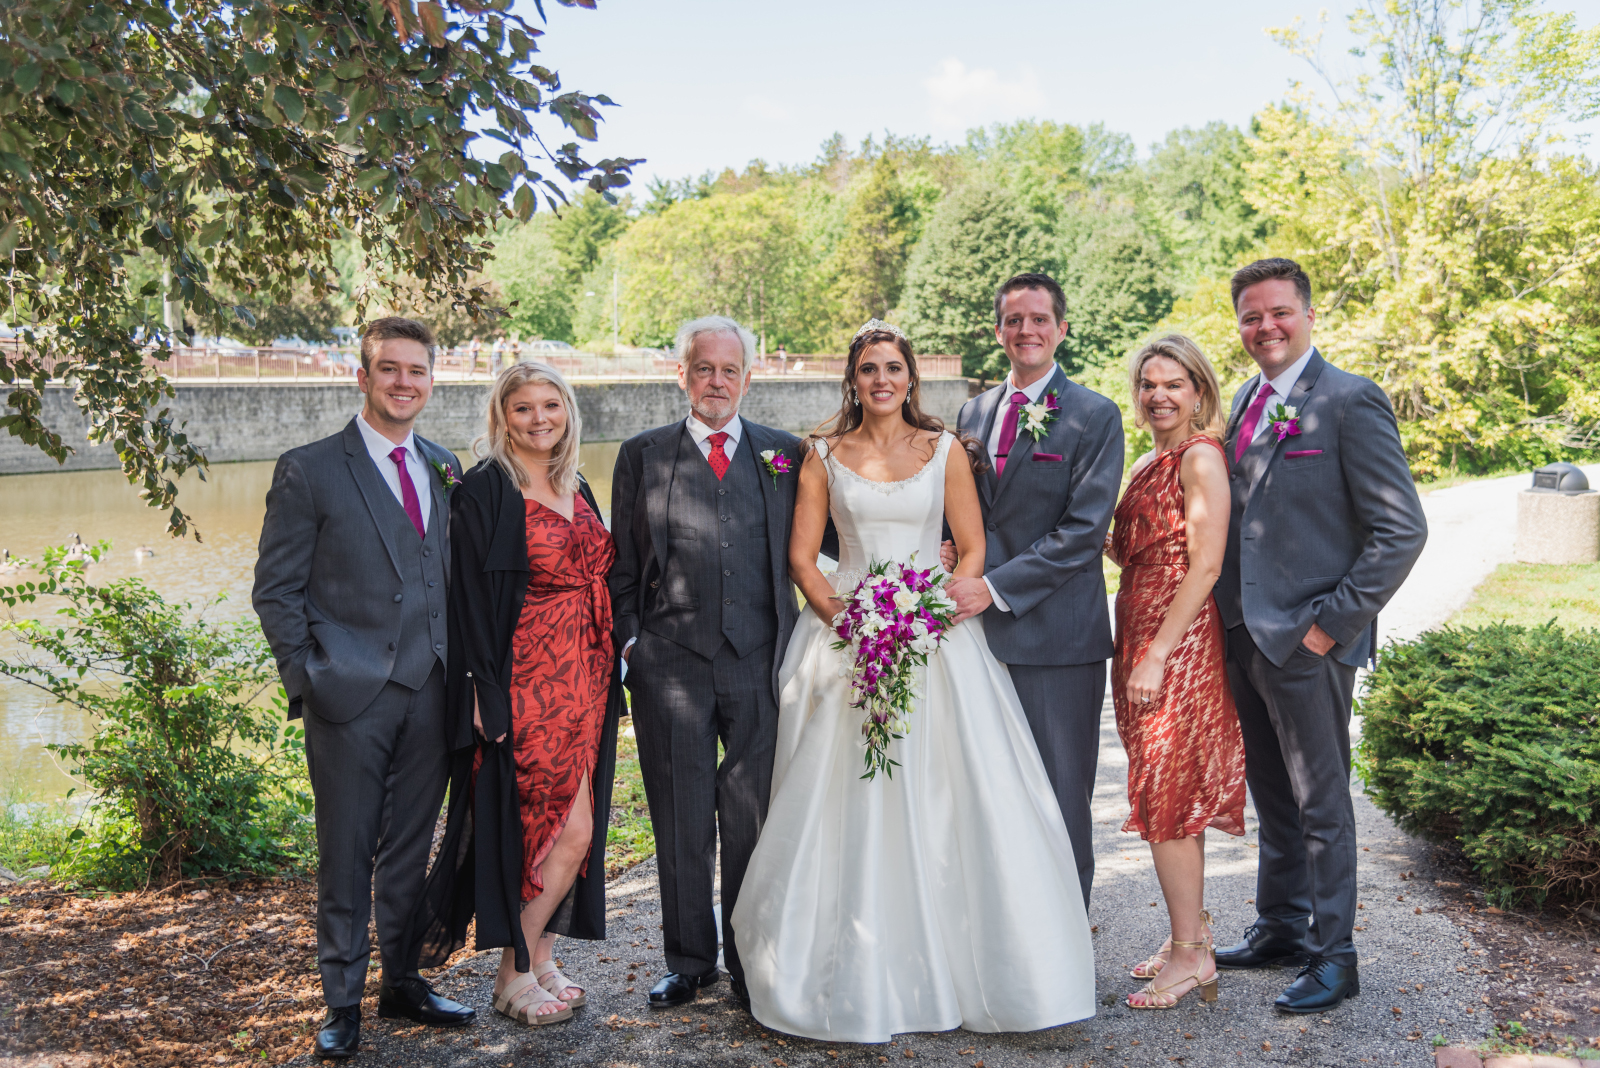 Bride and groom with family and friends, family portrait, groomsmen, trees, nature, pond, sweet wedding ceremony at Crocker Park, Westlake OH